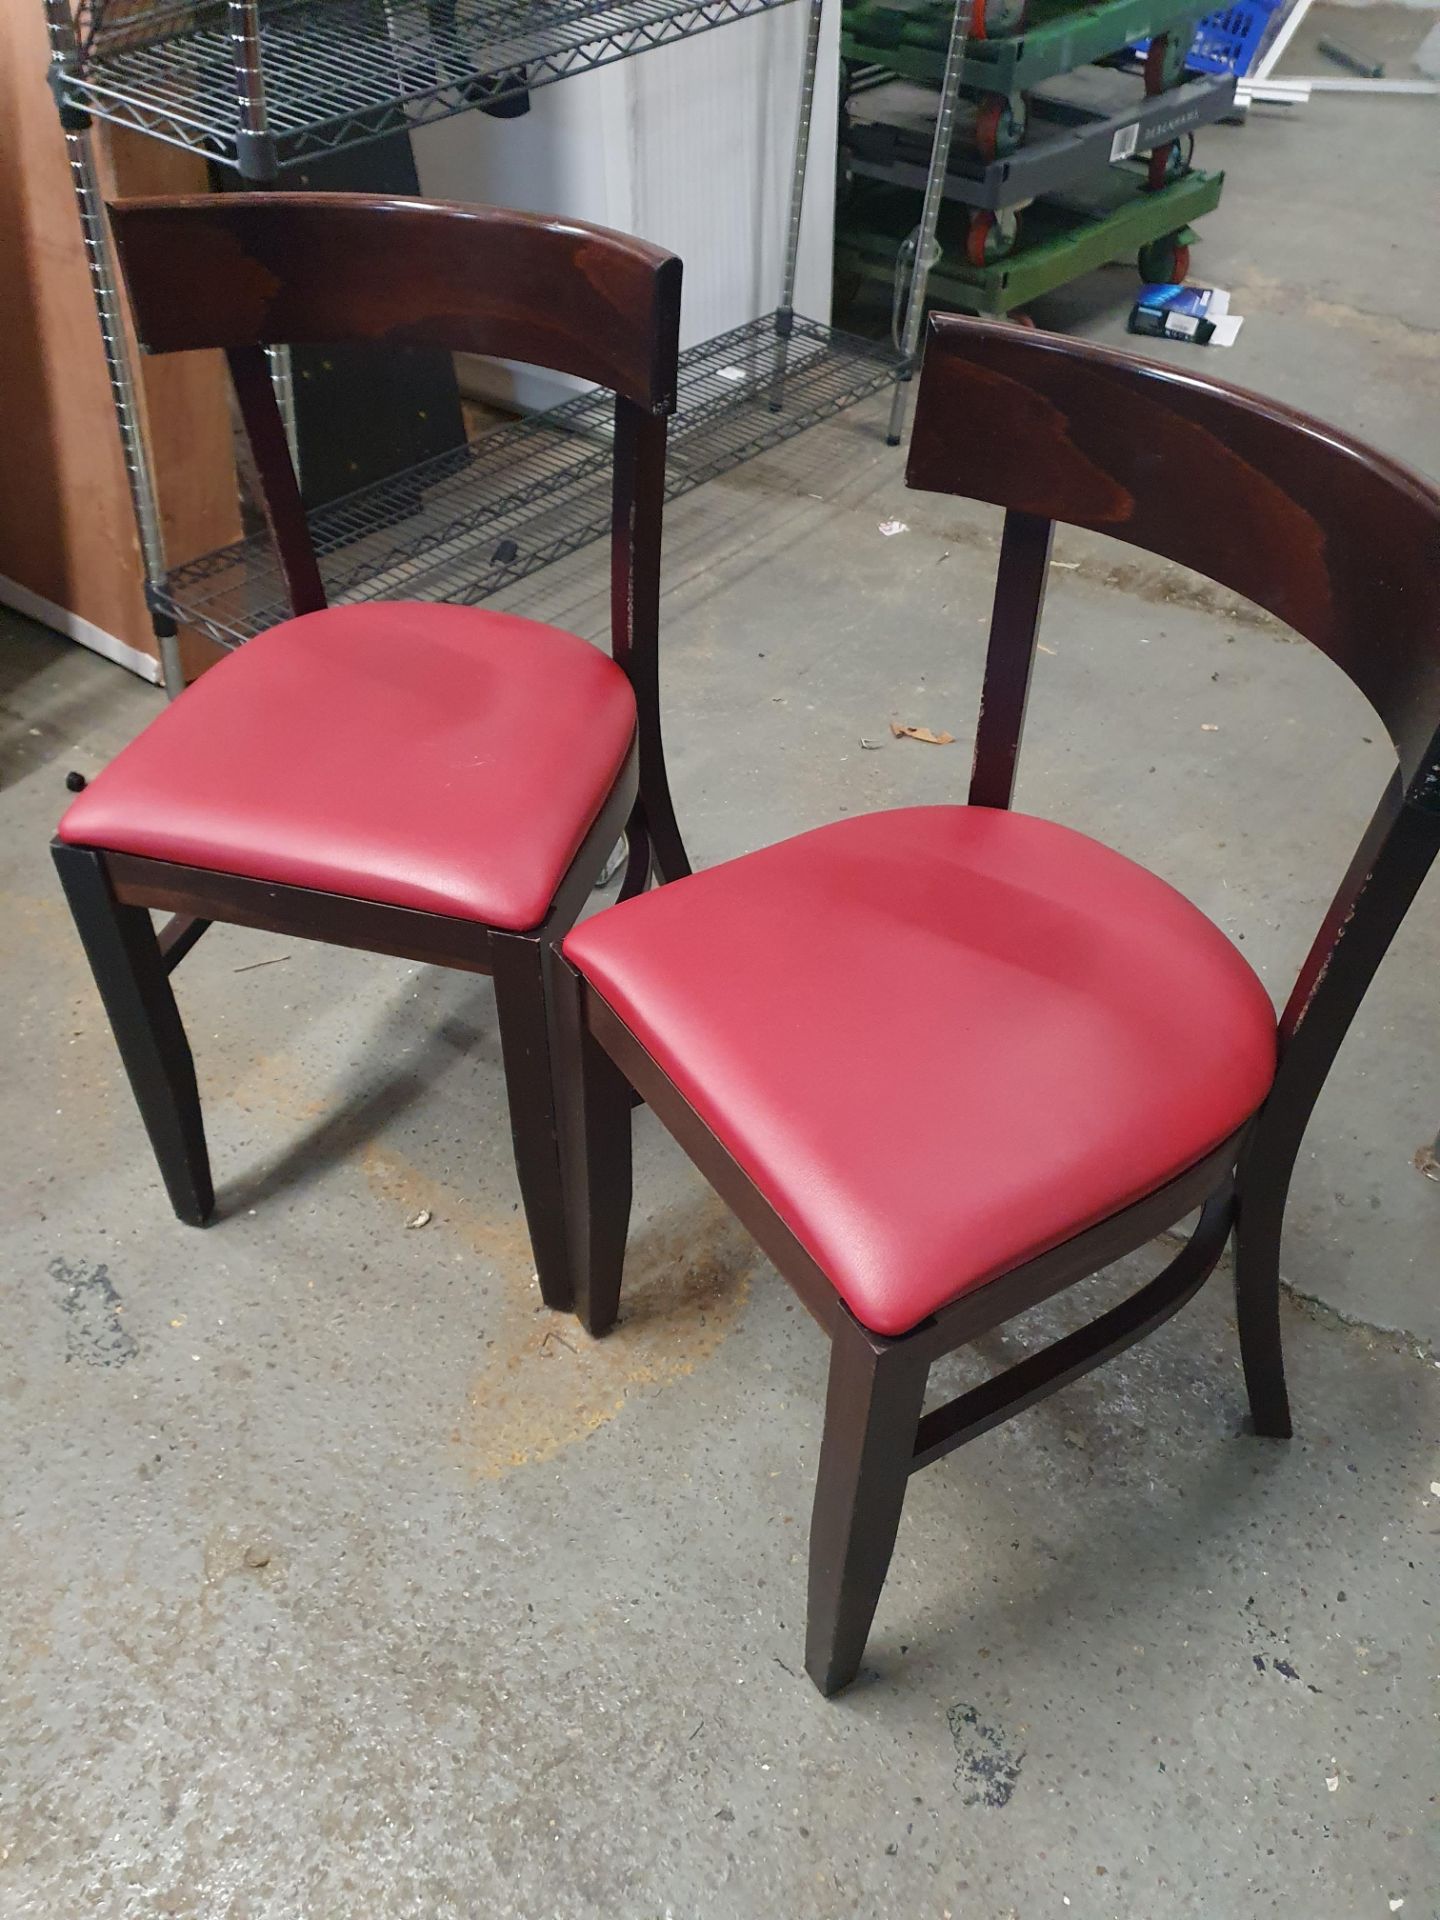 * 8 x chairs - red pads